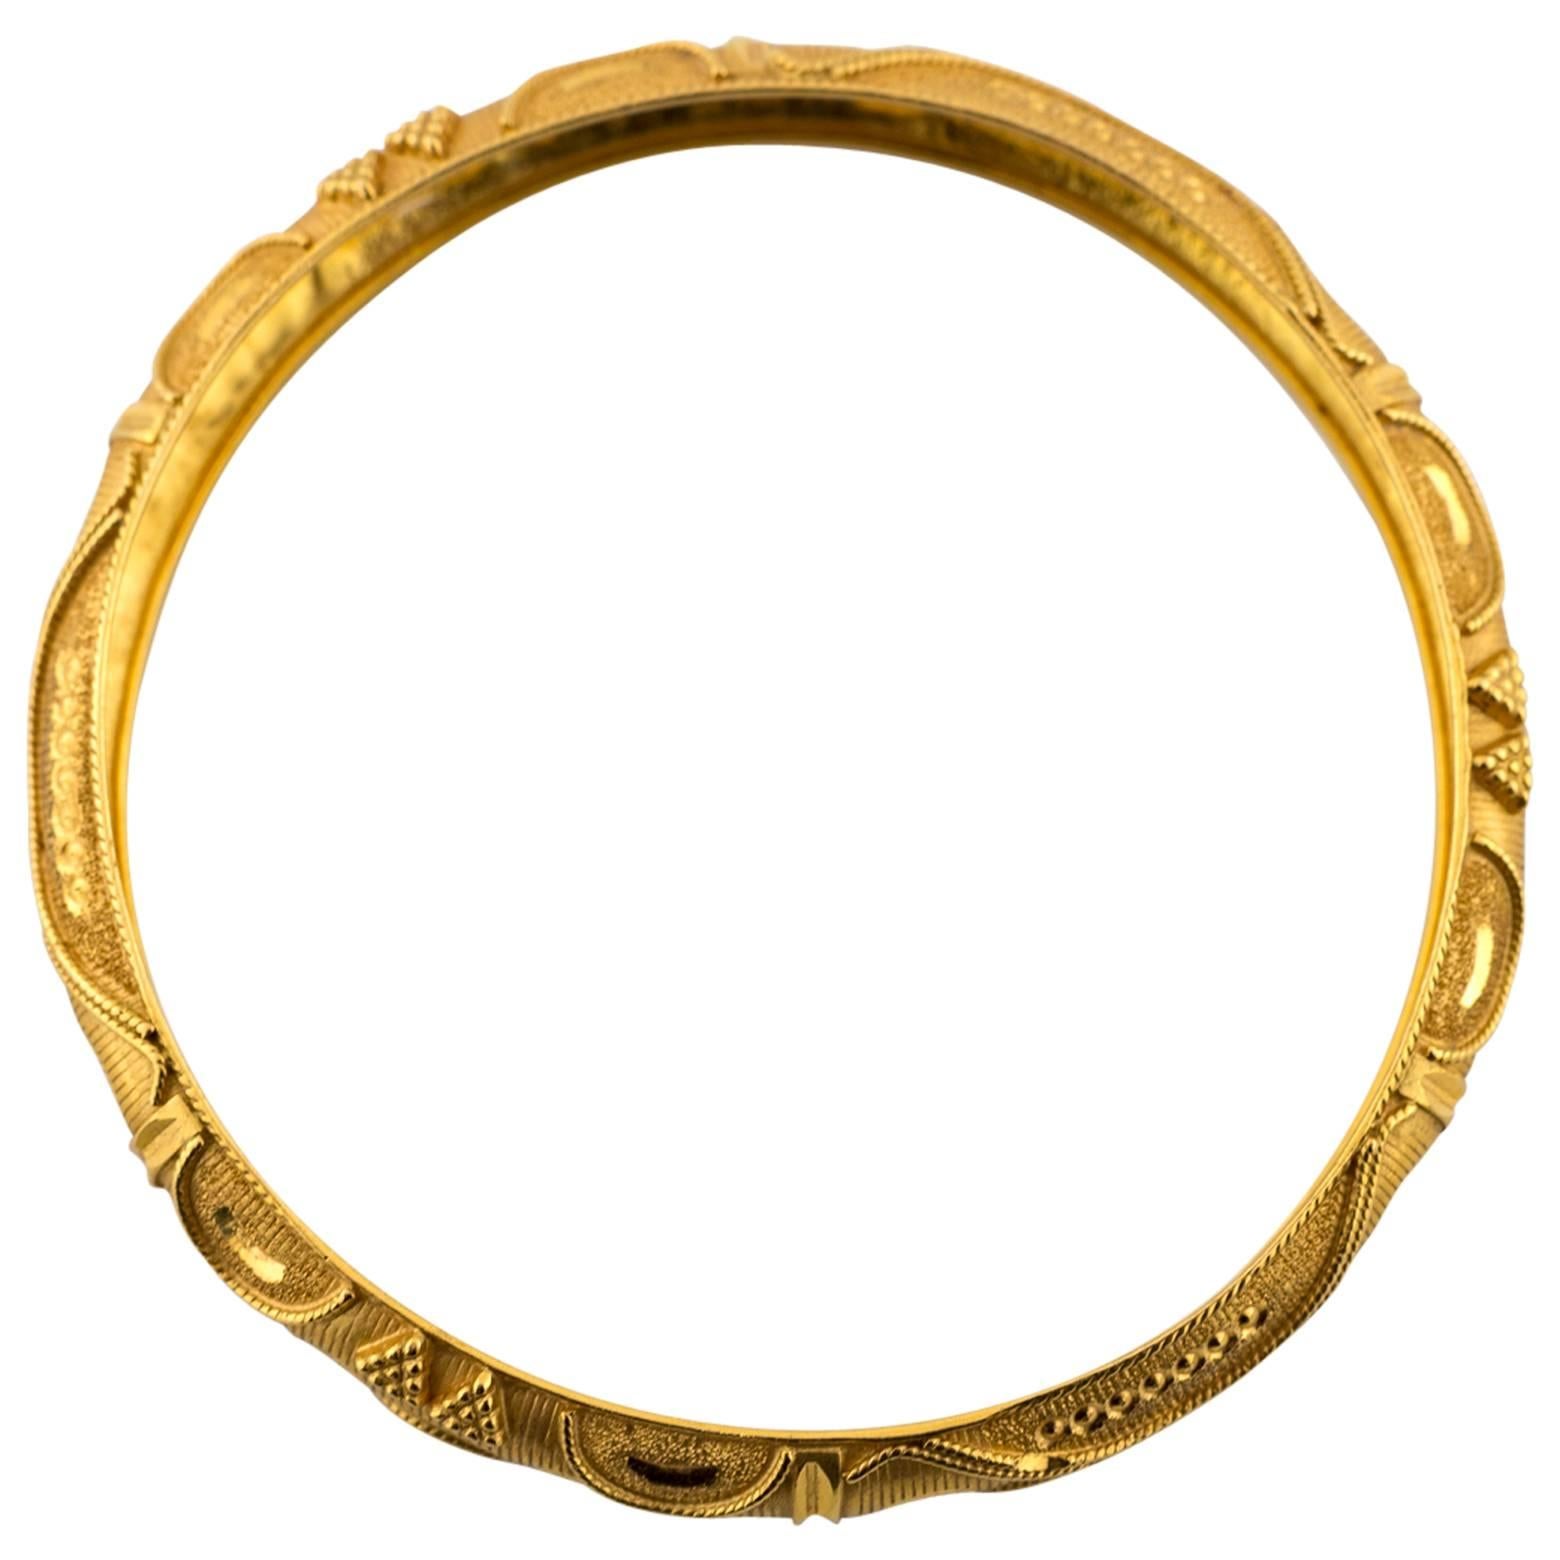 This 22K Yellow Gold Bangle is finely detailed and engraved with such intricacy everyone will want to admire it! You can stack it if you want to glam it up but it is so beautiful that wearing it alone will be exquisite. 